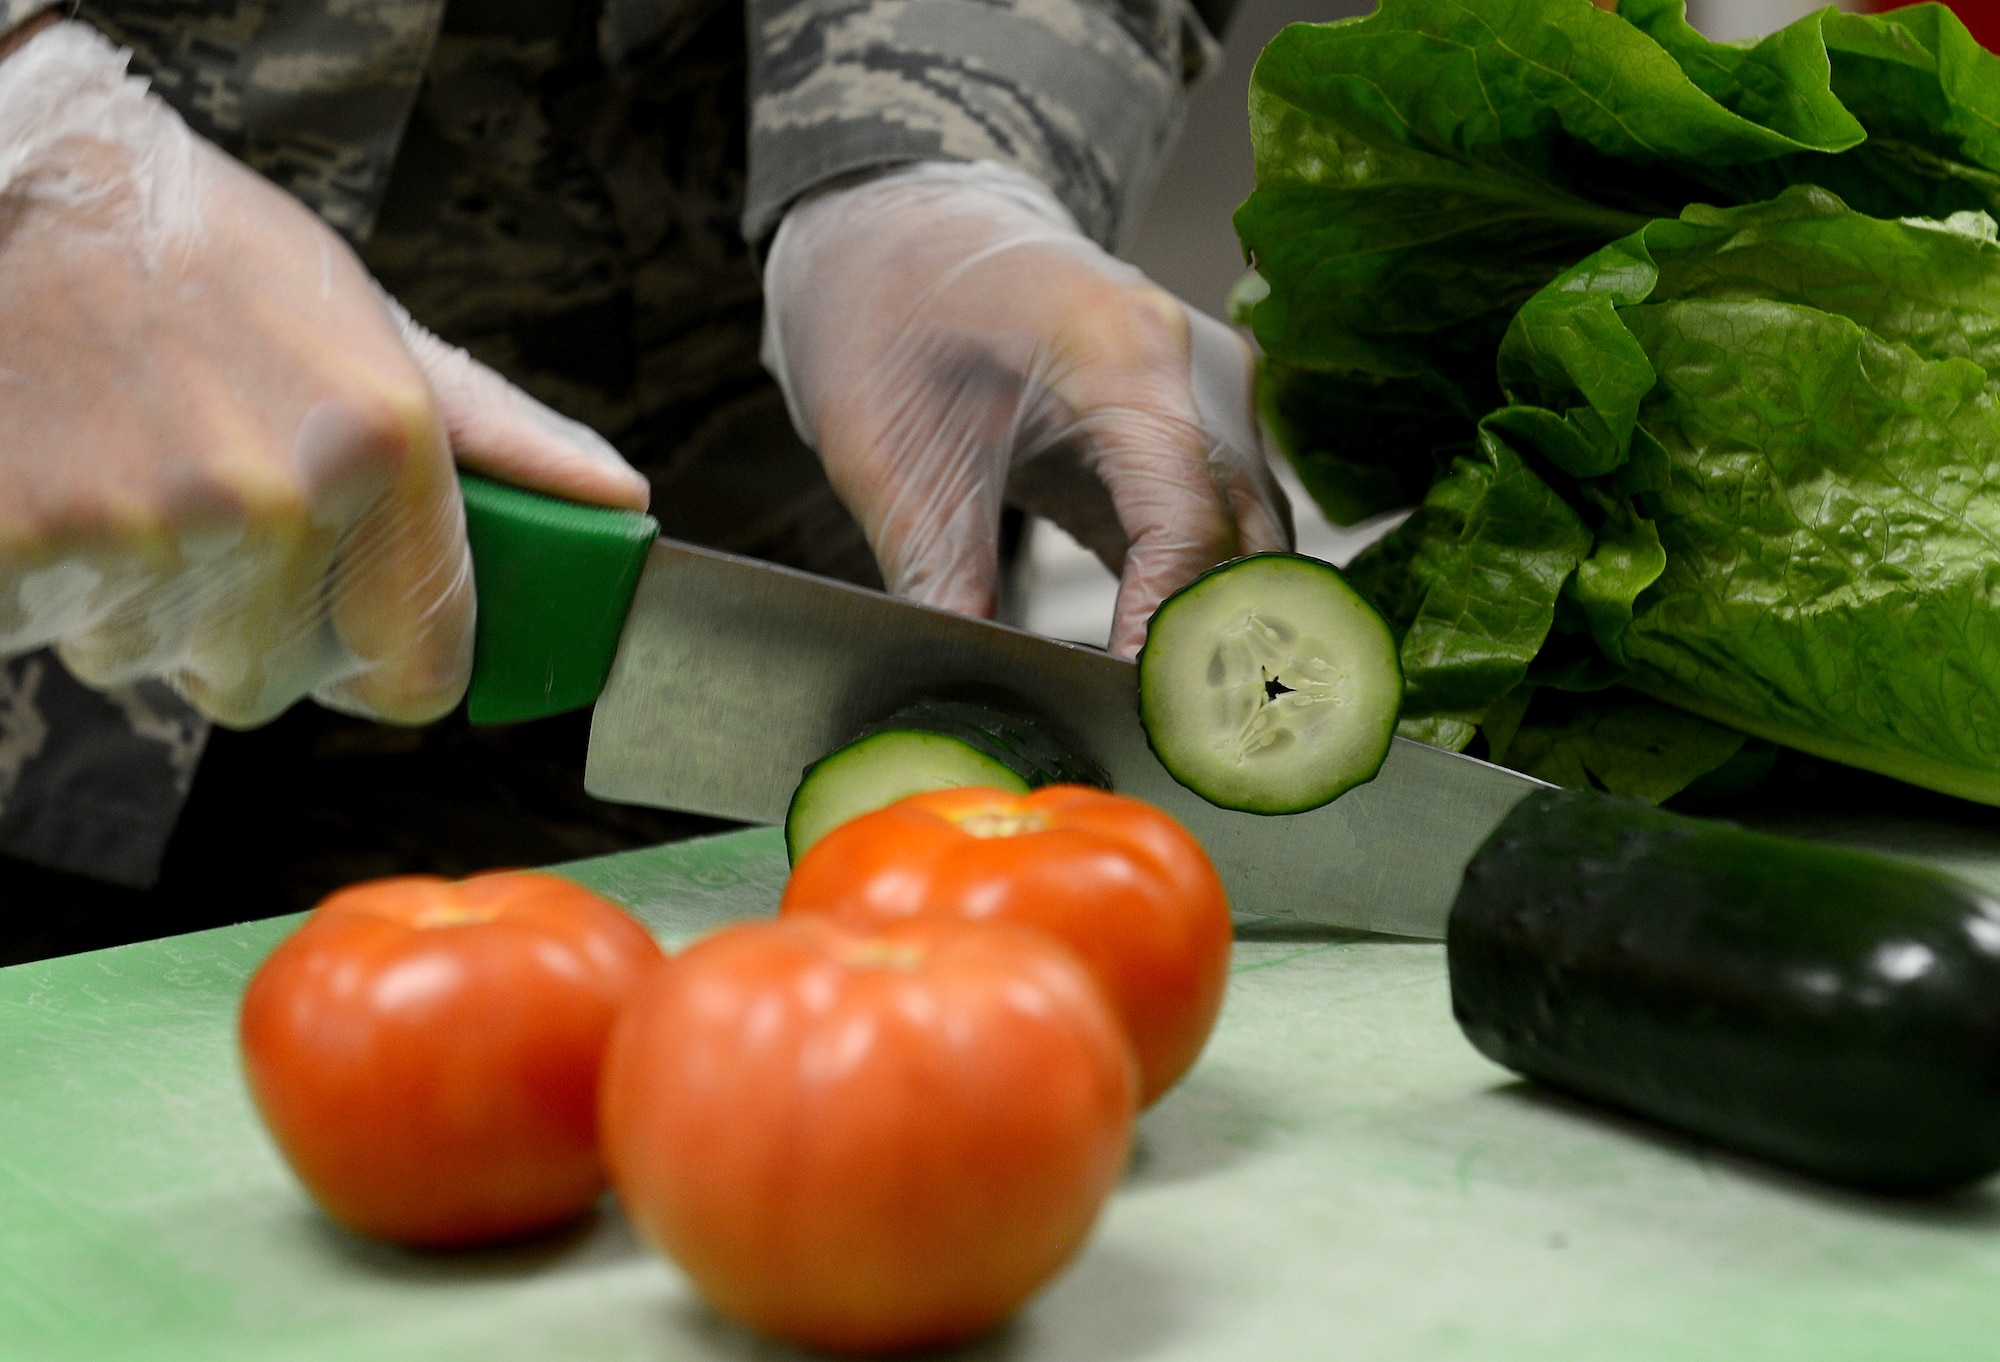 Airman 1st Class Arlena Harges, 627th Force Support Squadron food services apprentice, cuts vegetables for sandwiches and salads in the McChord flight kitchen Feb. 14, 2017 at Joint Base Lewis-McChord, Wash. The entrées for the boxed meals includes different types of sandwiches including turkey, ham and roast beef. They also have breaded chicken strips and a chef salad, as well as breakfast items. The supplemental options are often pre-contained food items such as chips, cookies, fresh fruit and your choice of beverage. (U.S. Air Force photo/Senior Airman Divine Cox)